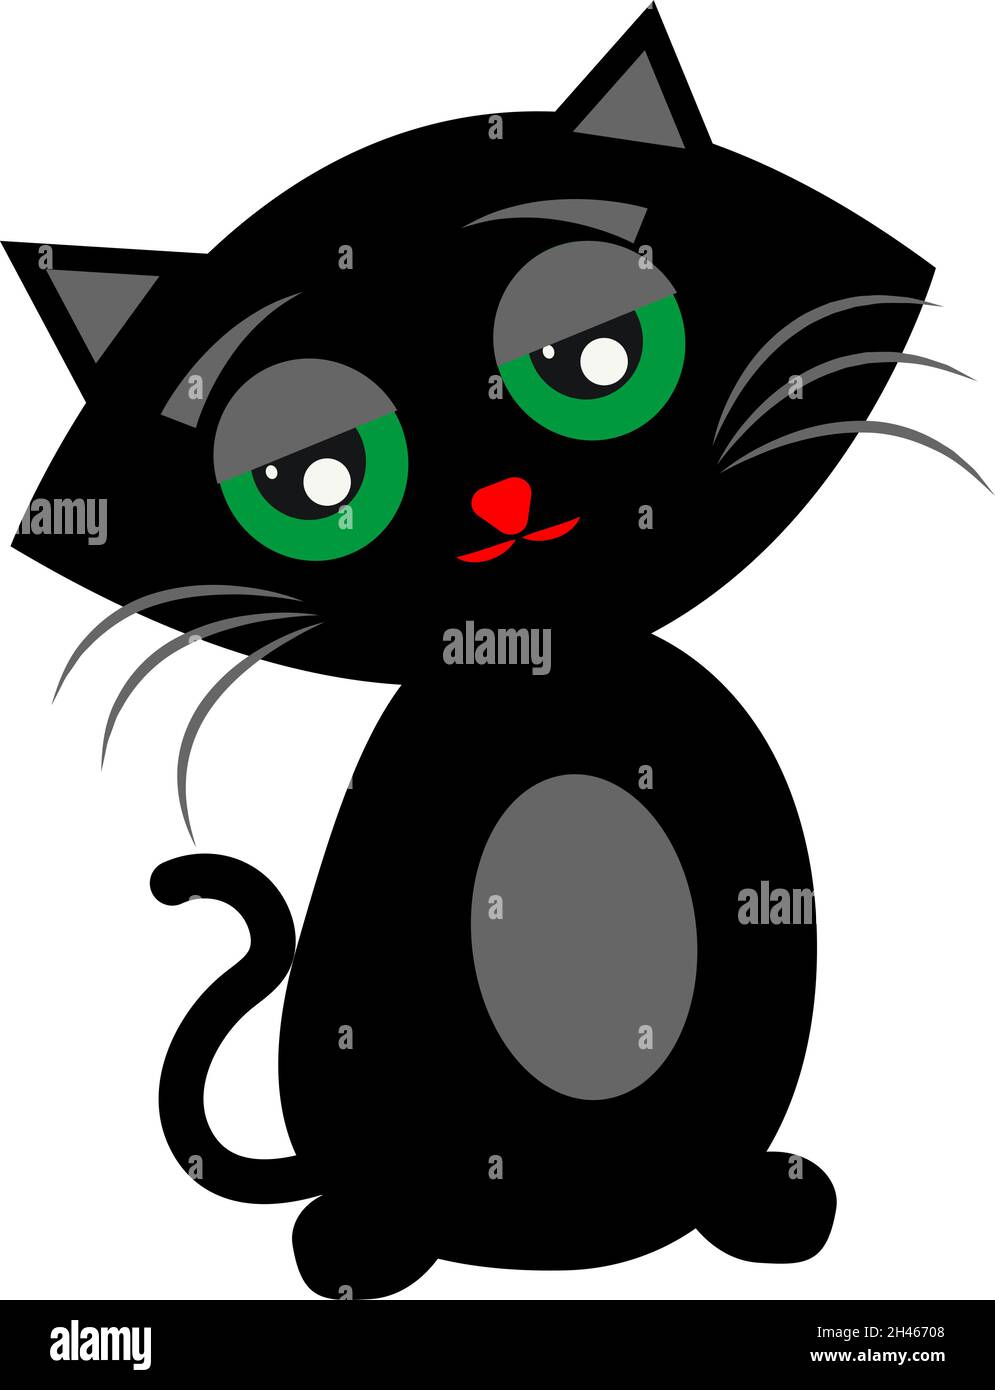 Sad cat, illustration, vector, on a white background. Stock Vector